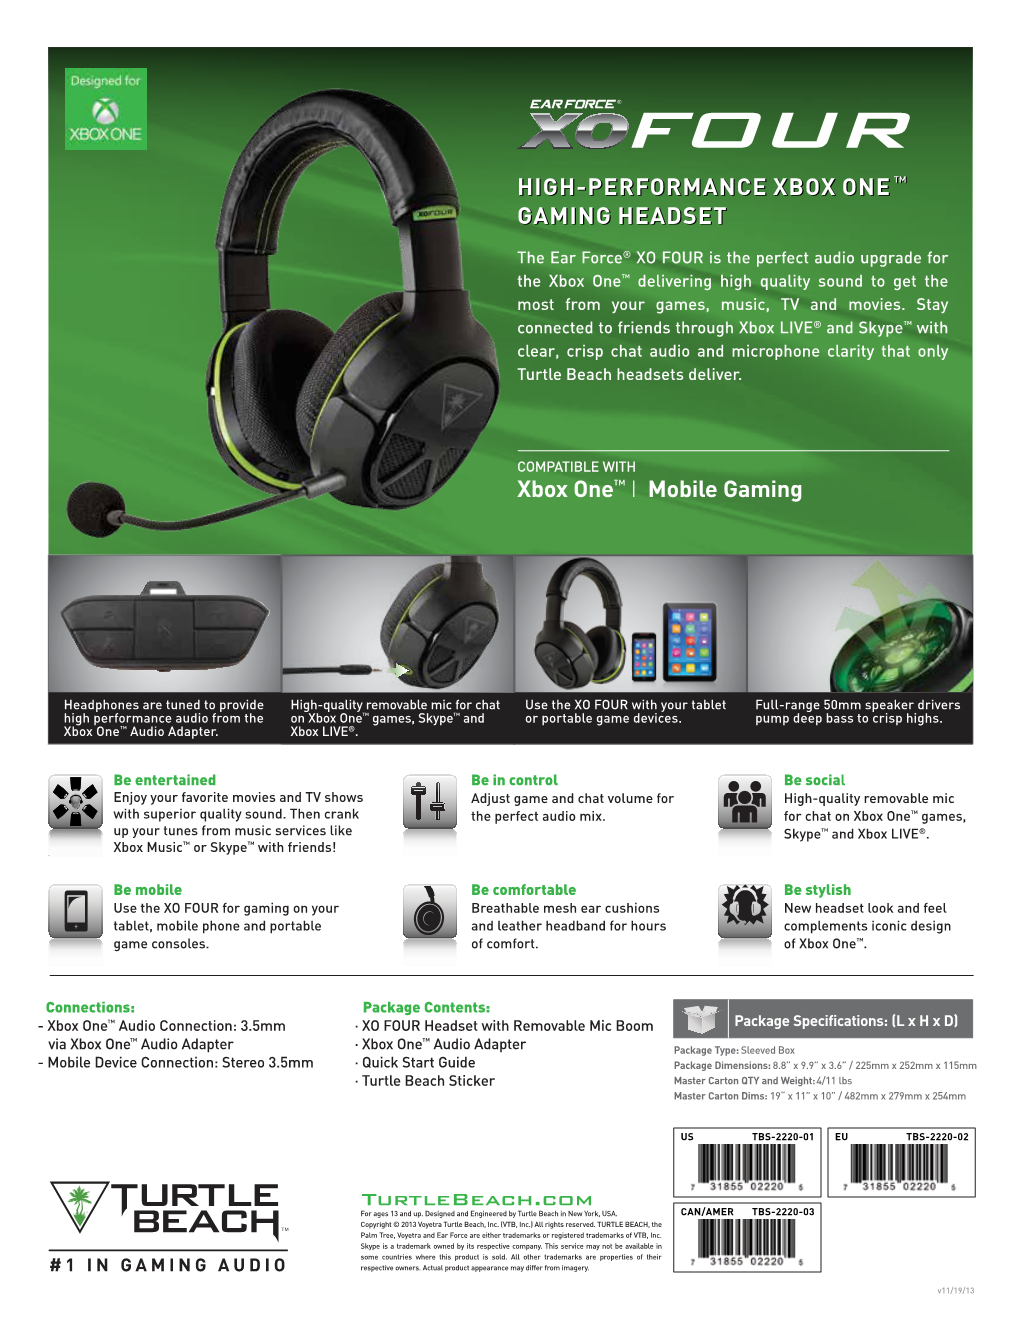 HIGH-PERFORMANCE XBOX ONE™ GAMING HEADSET HIGH-PERFORMANCE XBOX ONE™ GAMING HEADSET Xbox One™ I Mobile Gaming